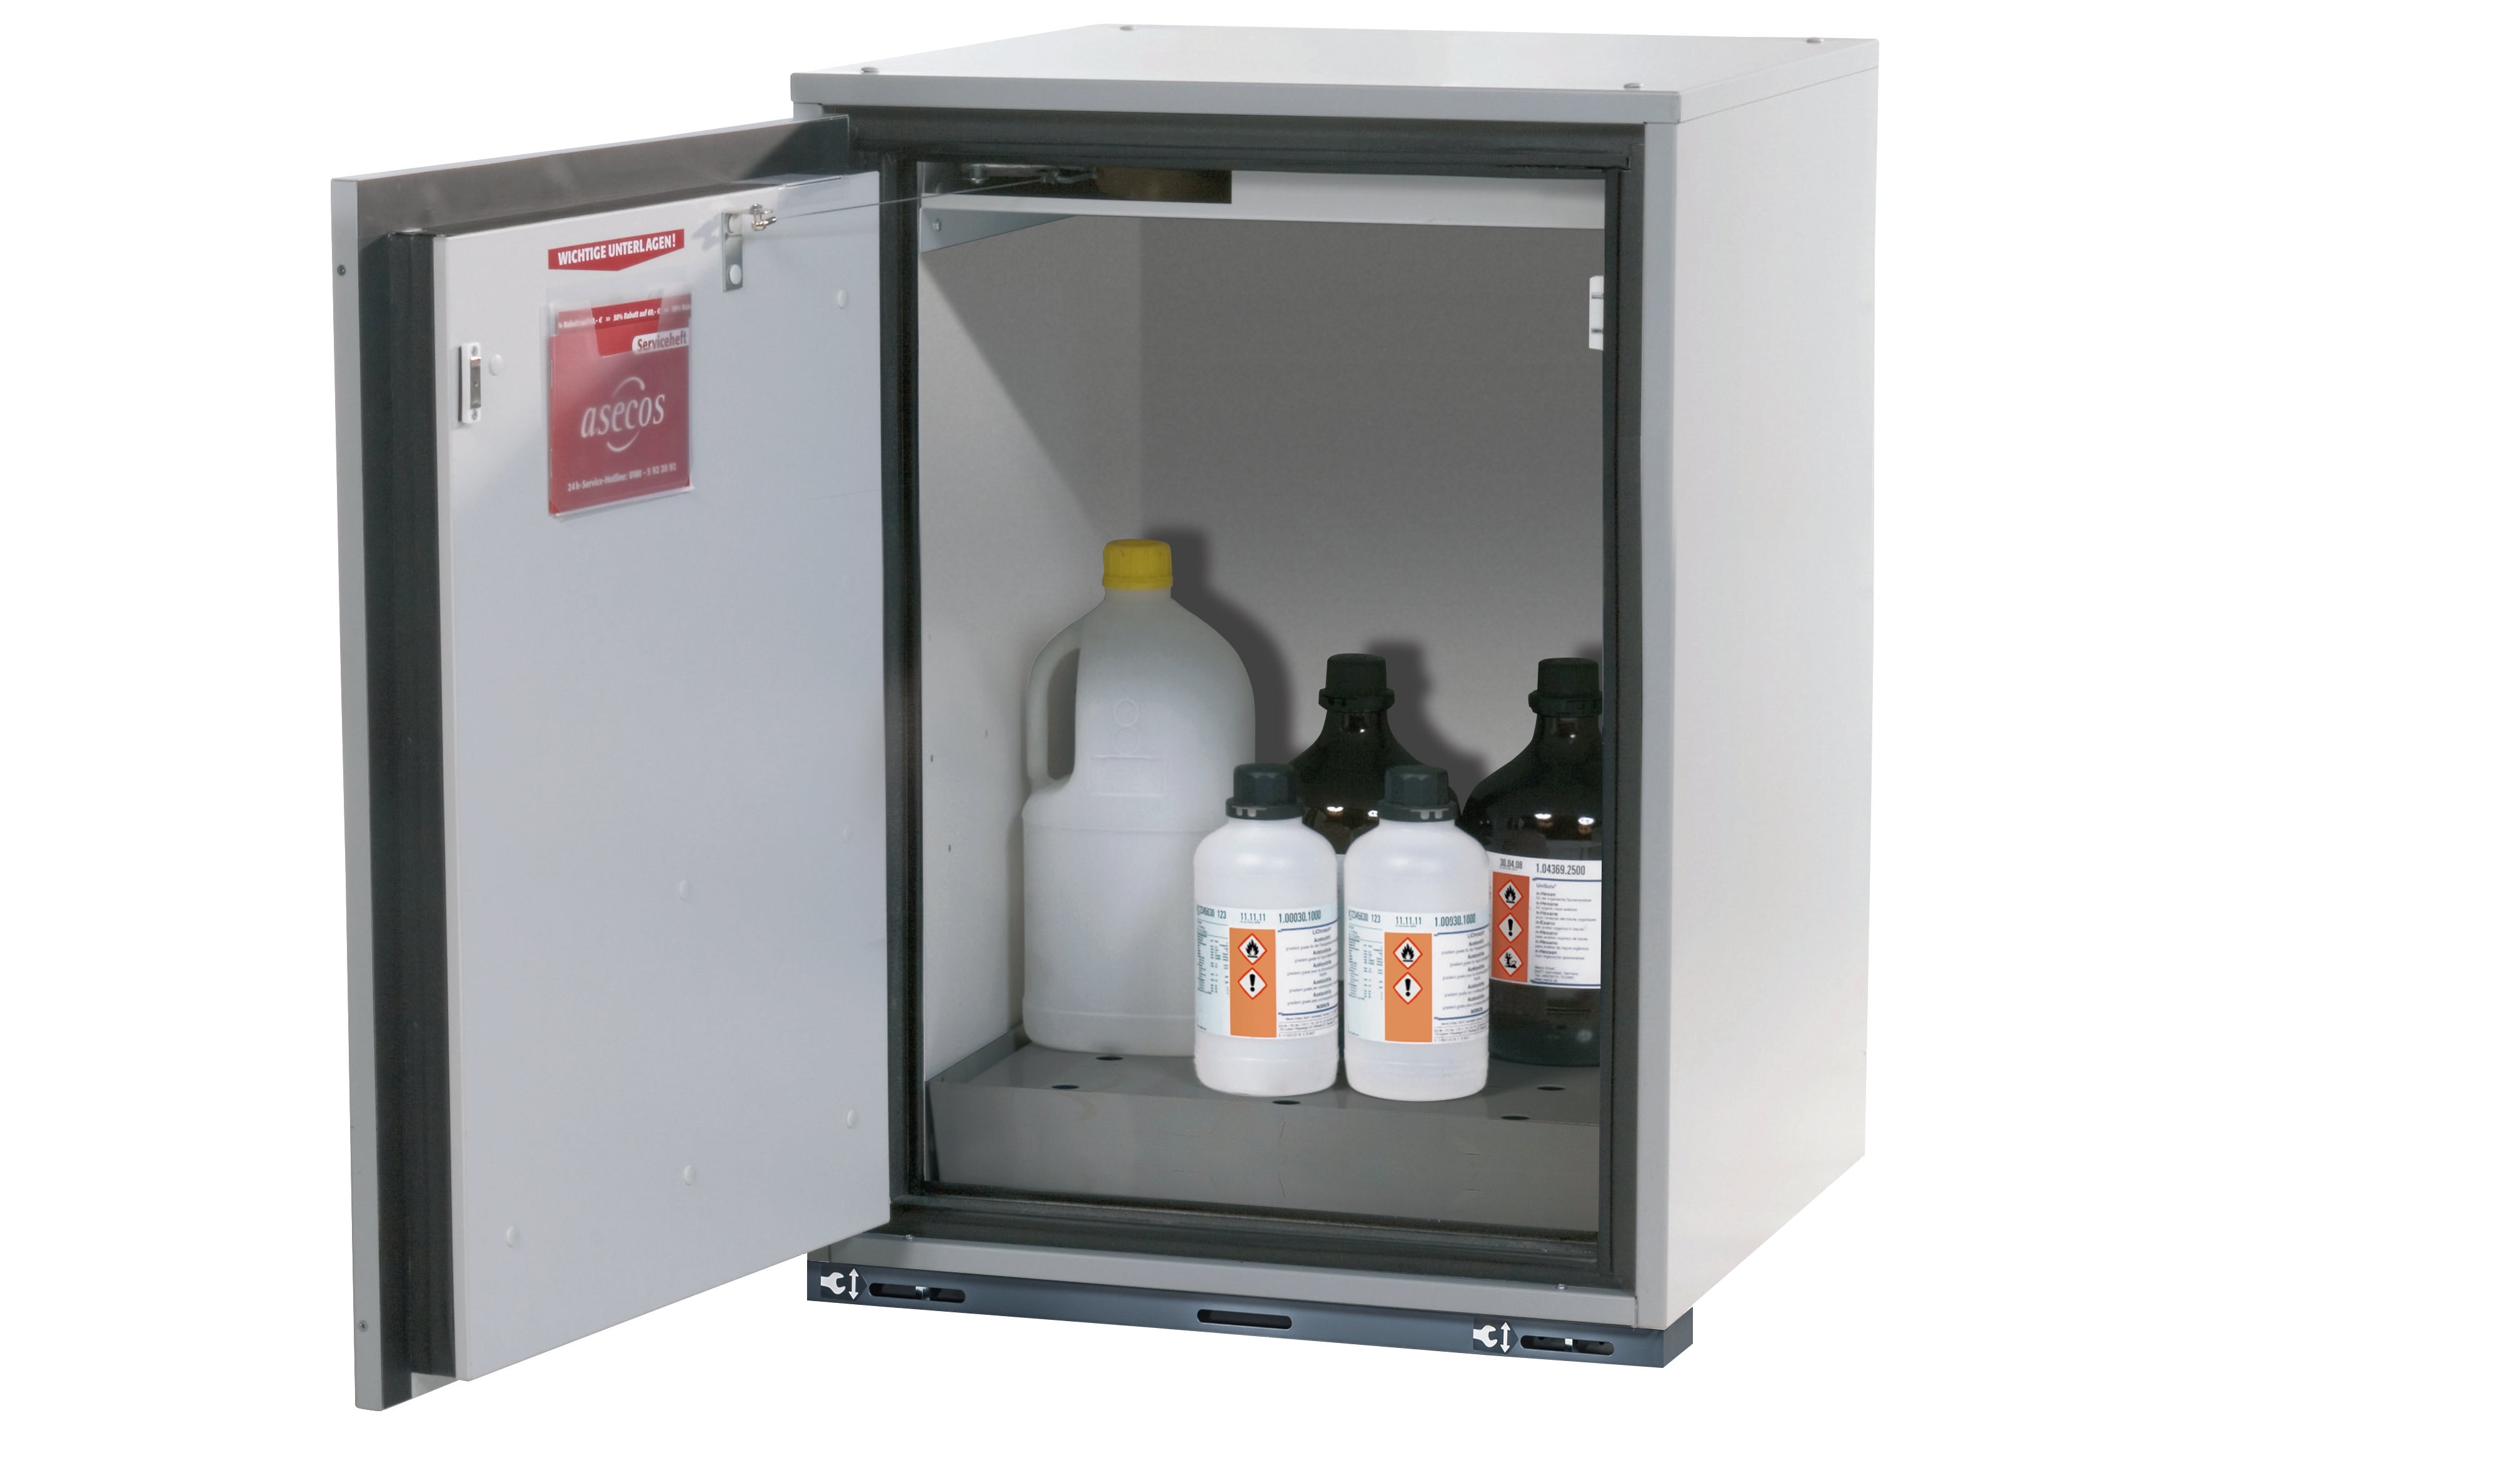 Type 90 safety base cabinet UB-T-90 model UB90.080.059.060.T in light gray RAL 7035 with 1x perforated sheet metal insert standard (stainless steel 1.4016)